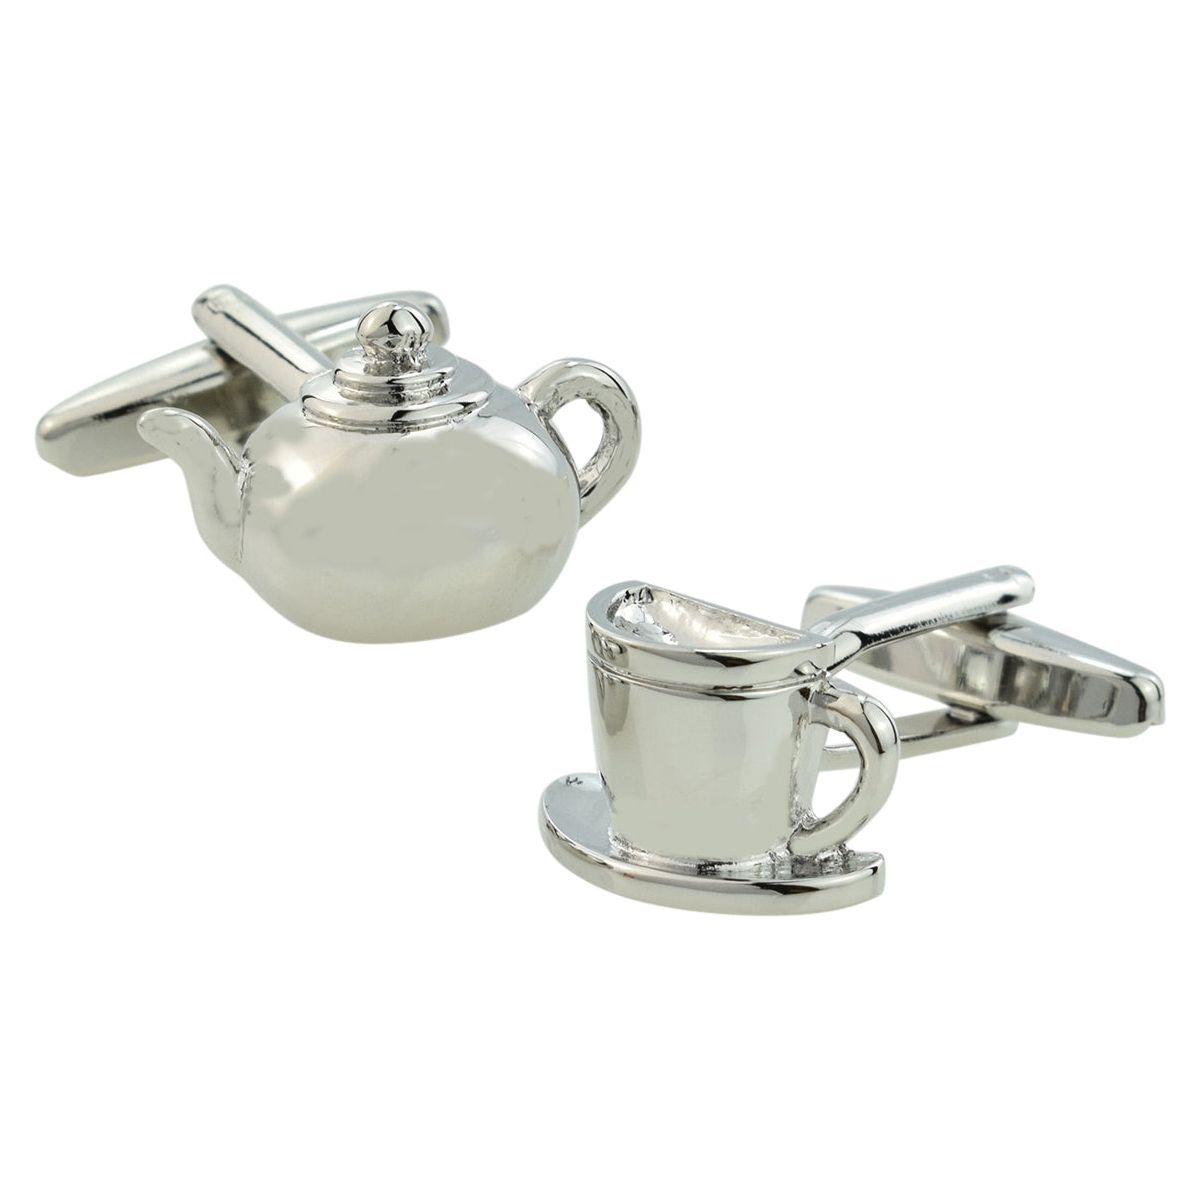 Teacup and Teapot Cufflinks - Ashton and Finch